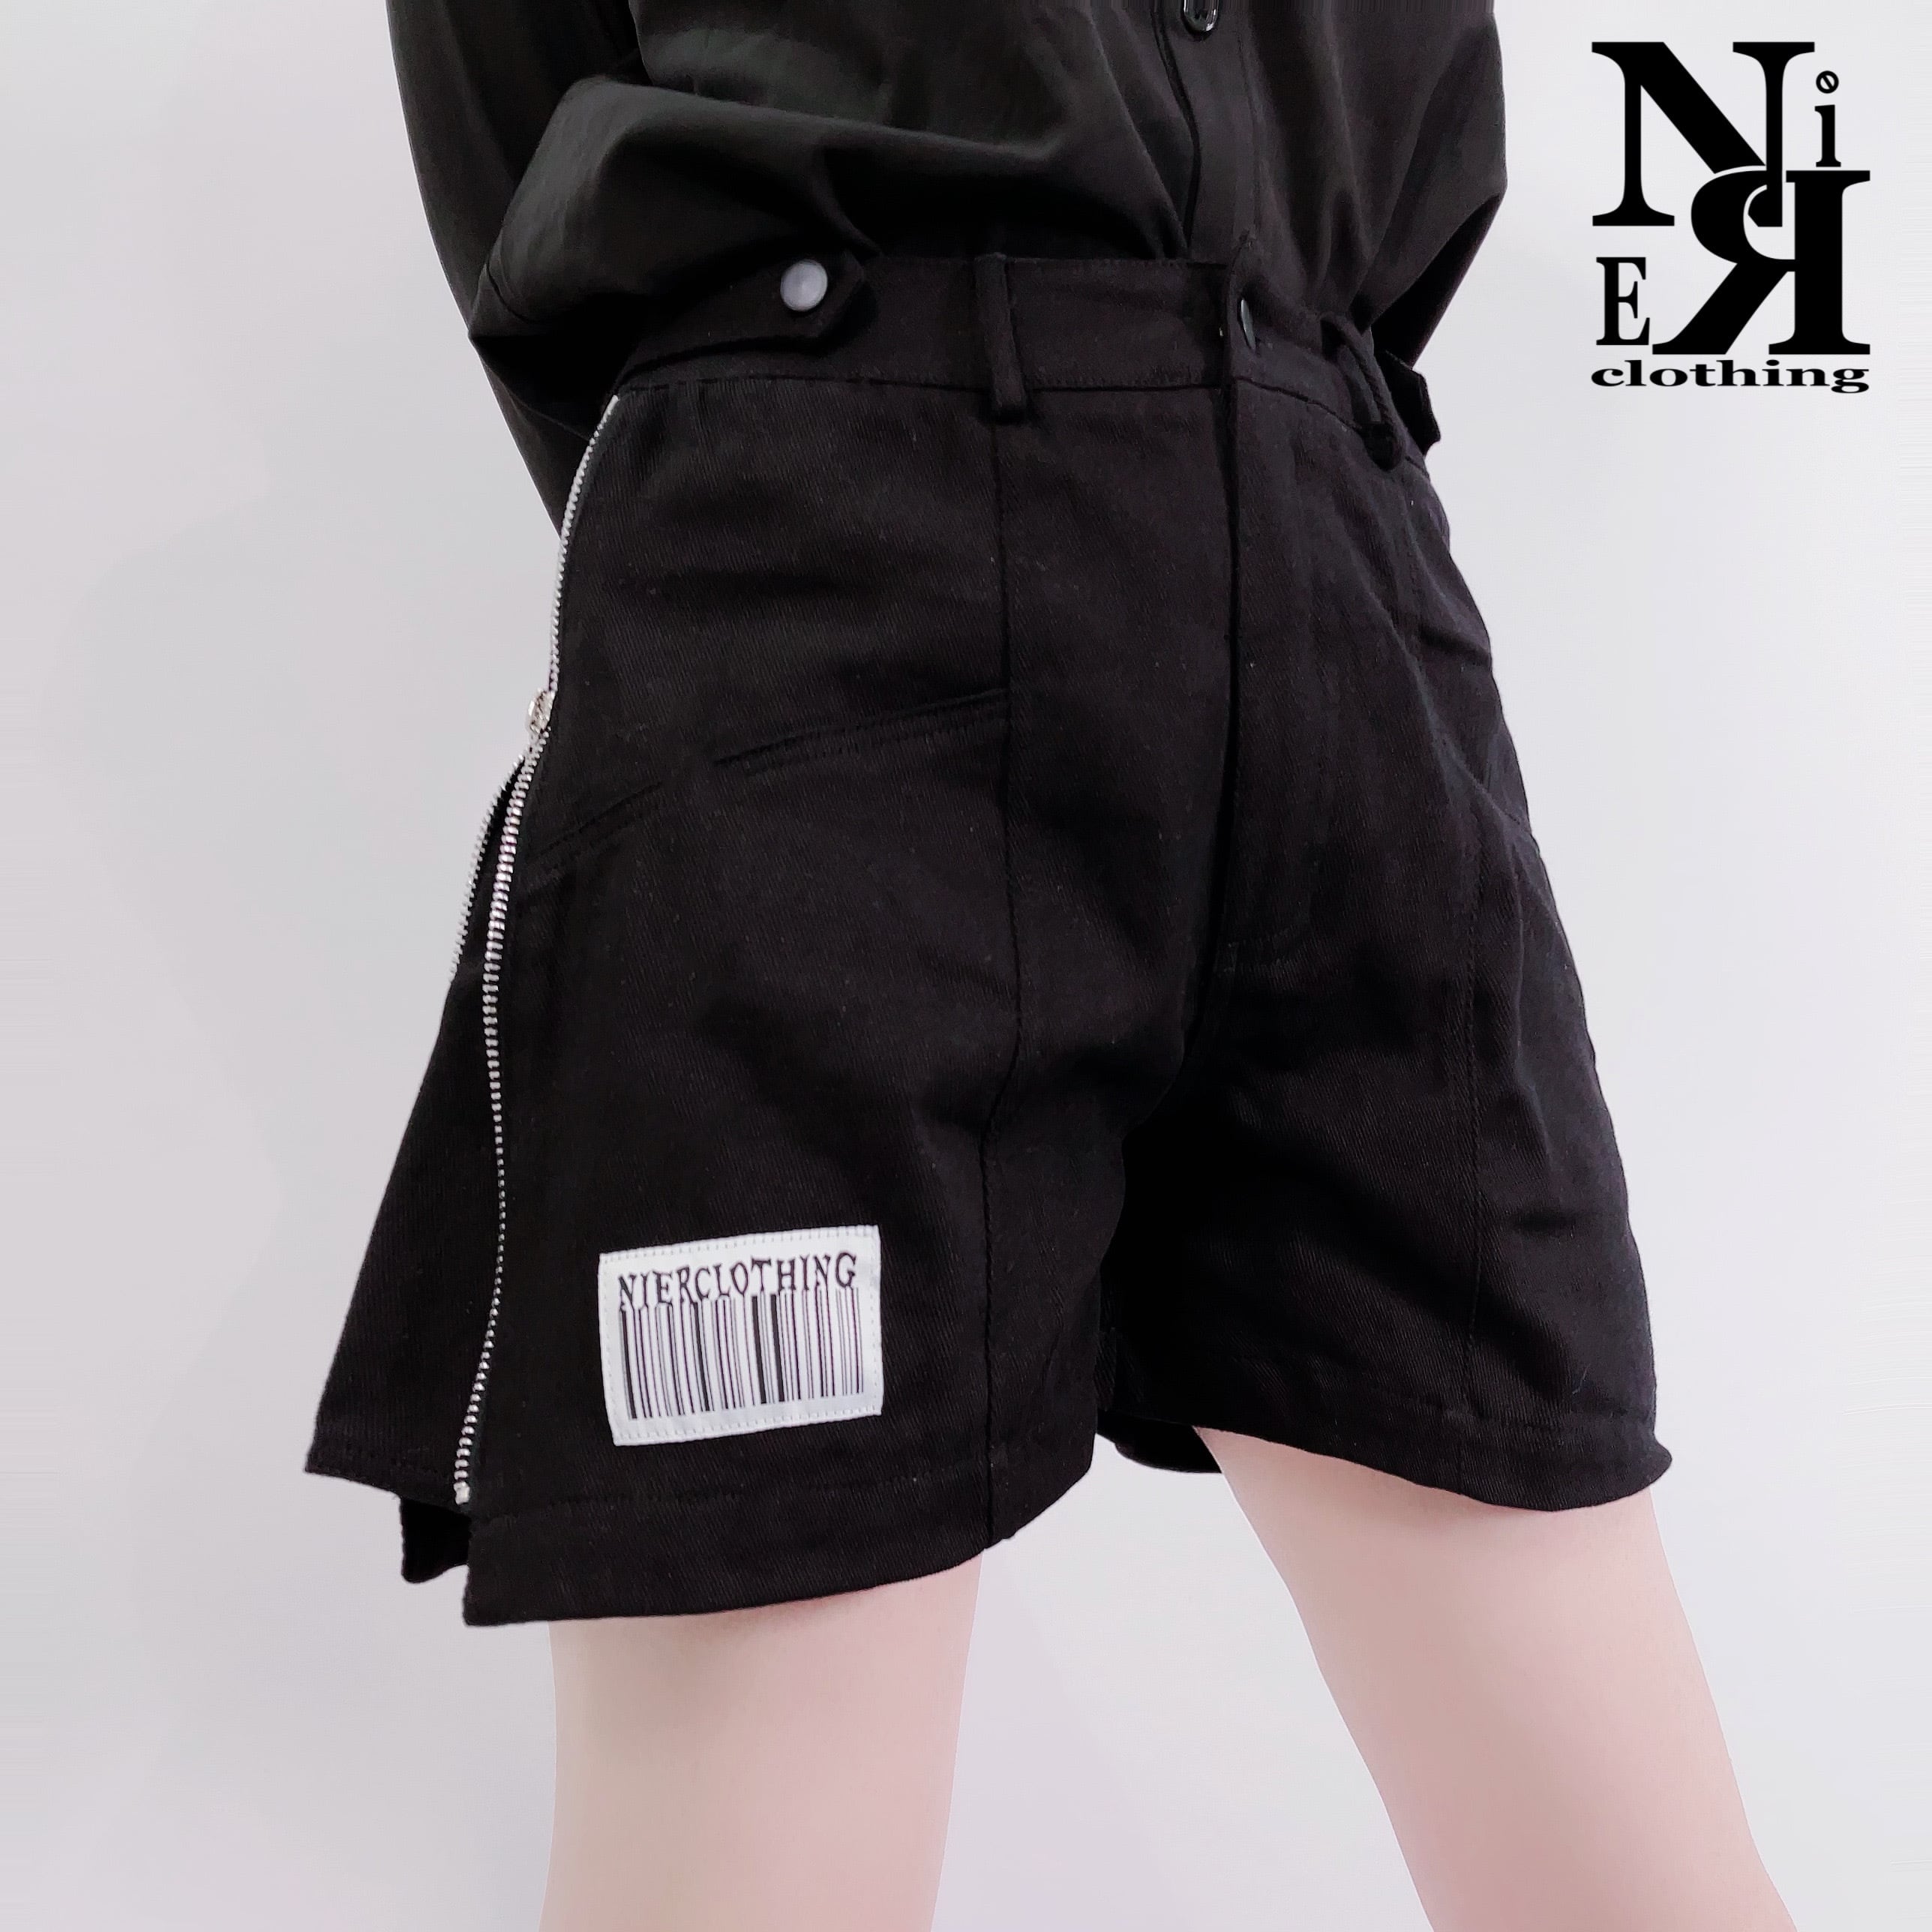 SIDE ZIPショートパンツ【NieR CODE】 | NIER CLOTHING powered by BASE